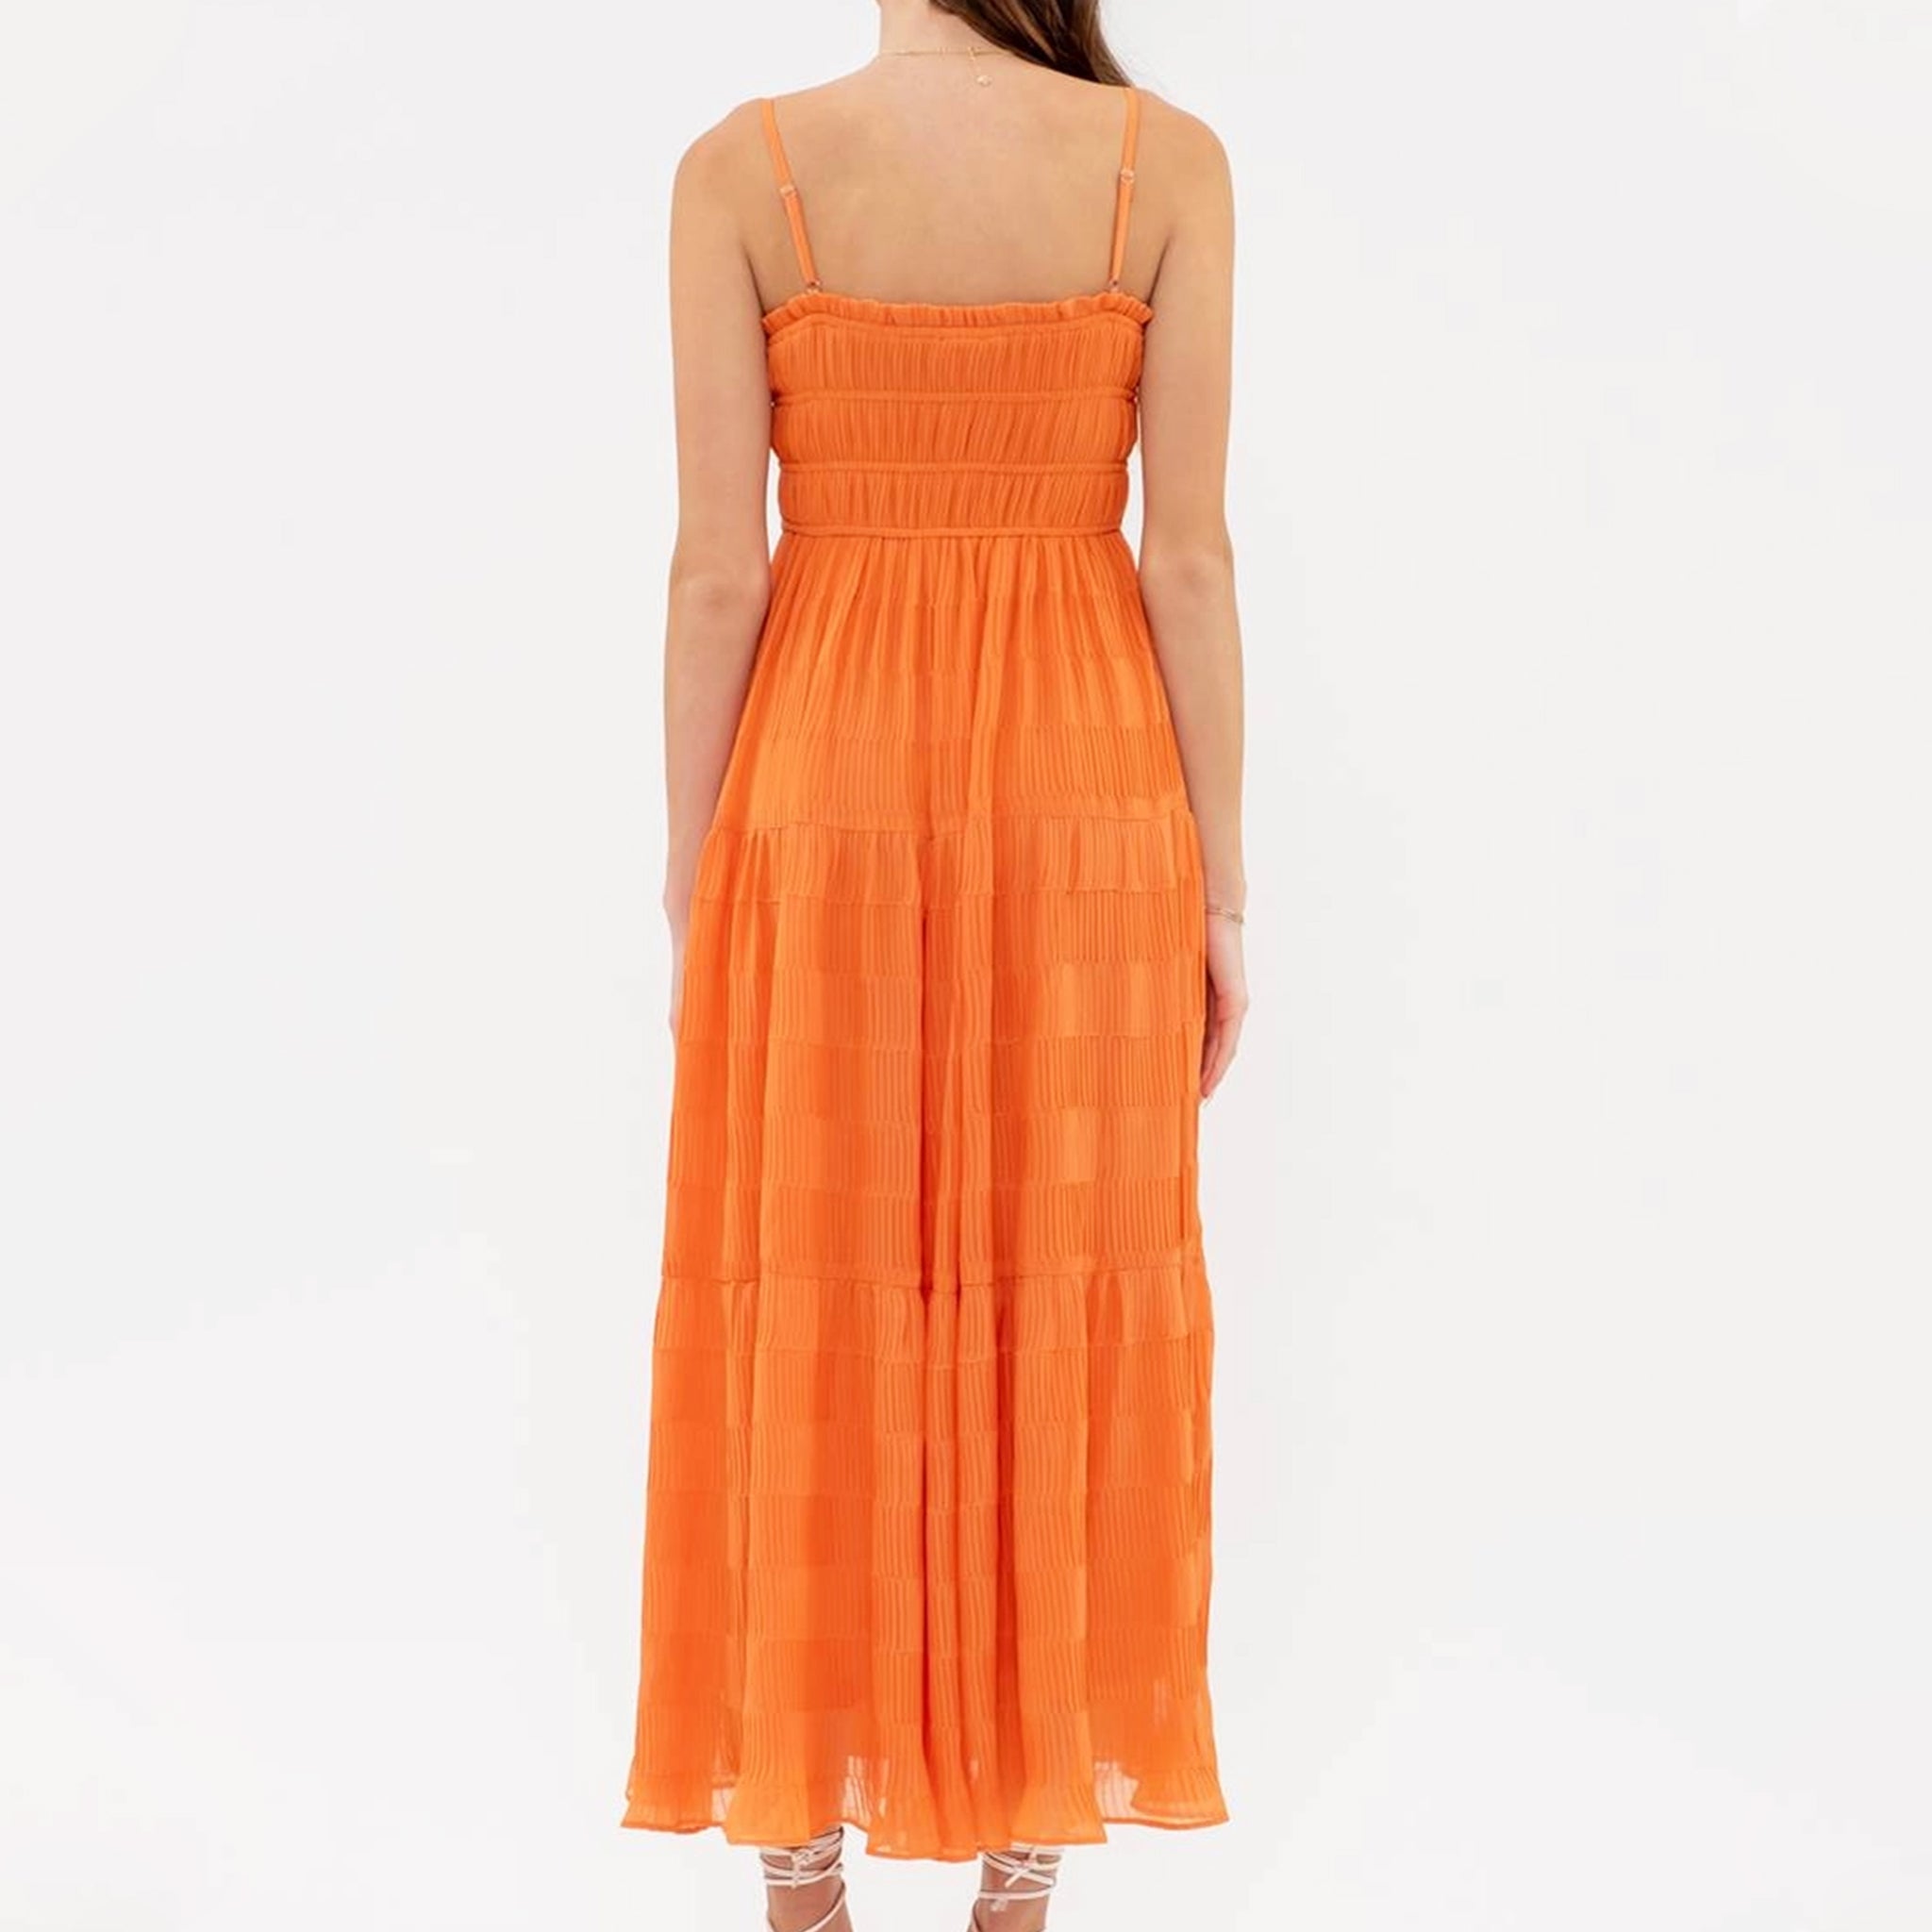 On a peach background is vibrant orange tiered midi dress with a smocked bodice and spaghetti straps.